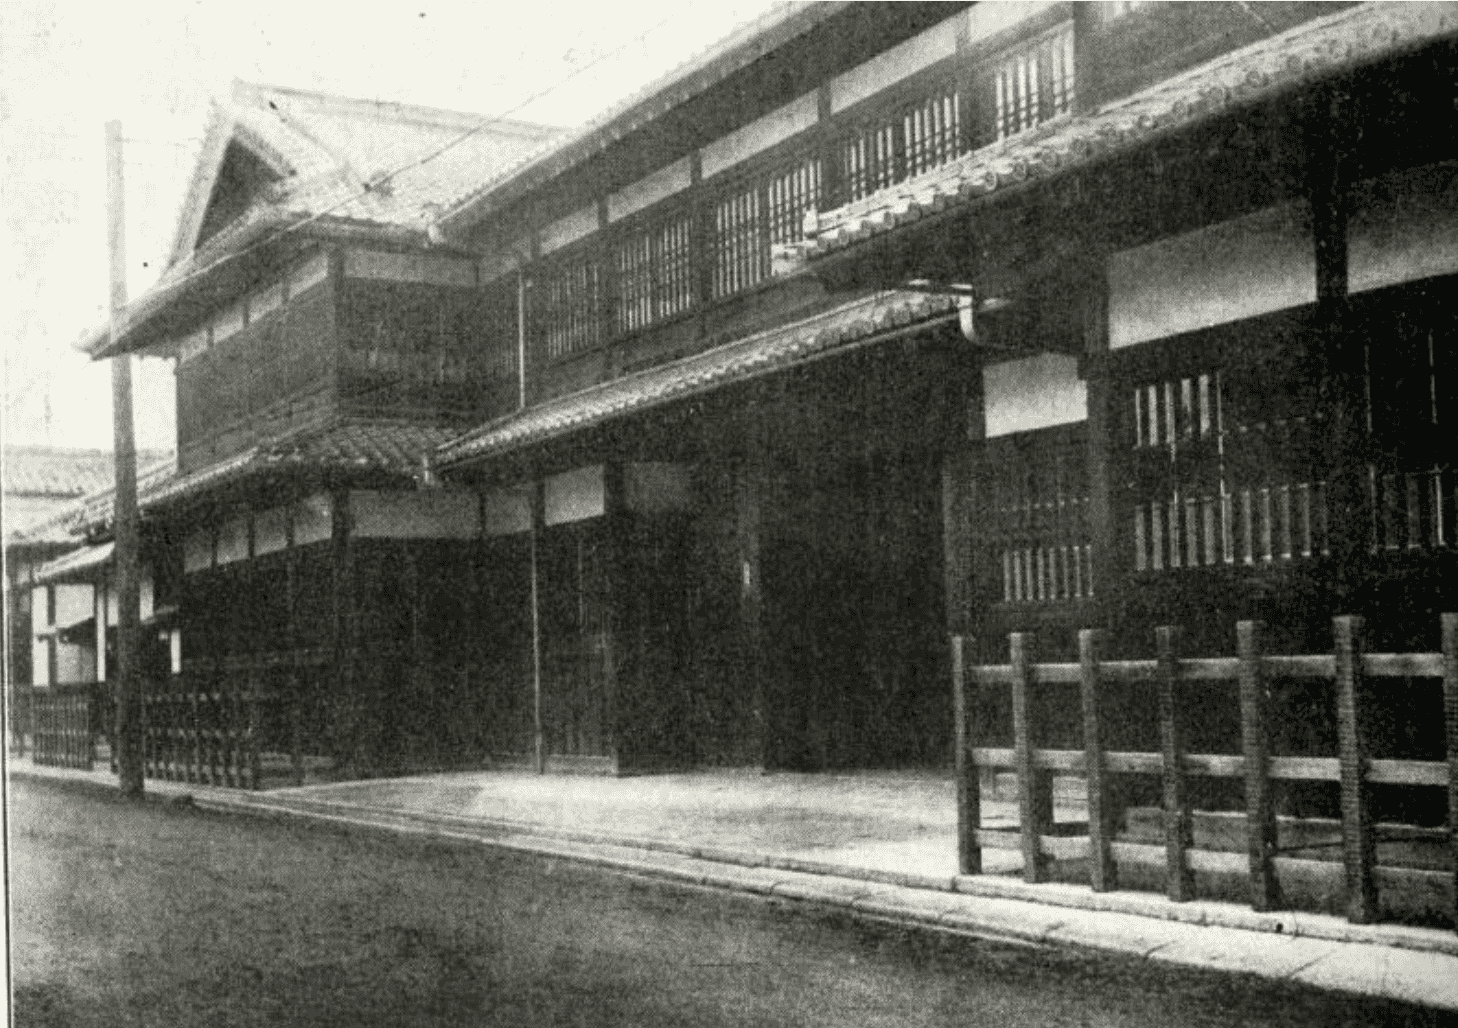 Photo of the Seisho Elementary School around 1918, owned by Kyoto Municipal Museum of School History